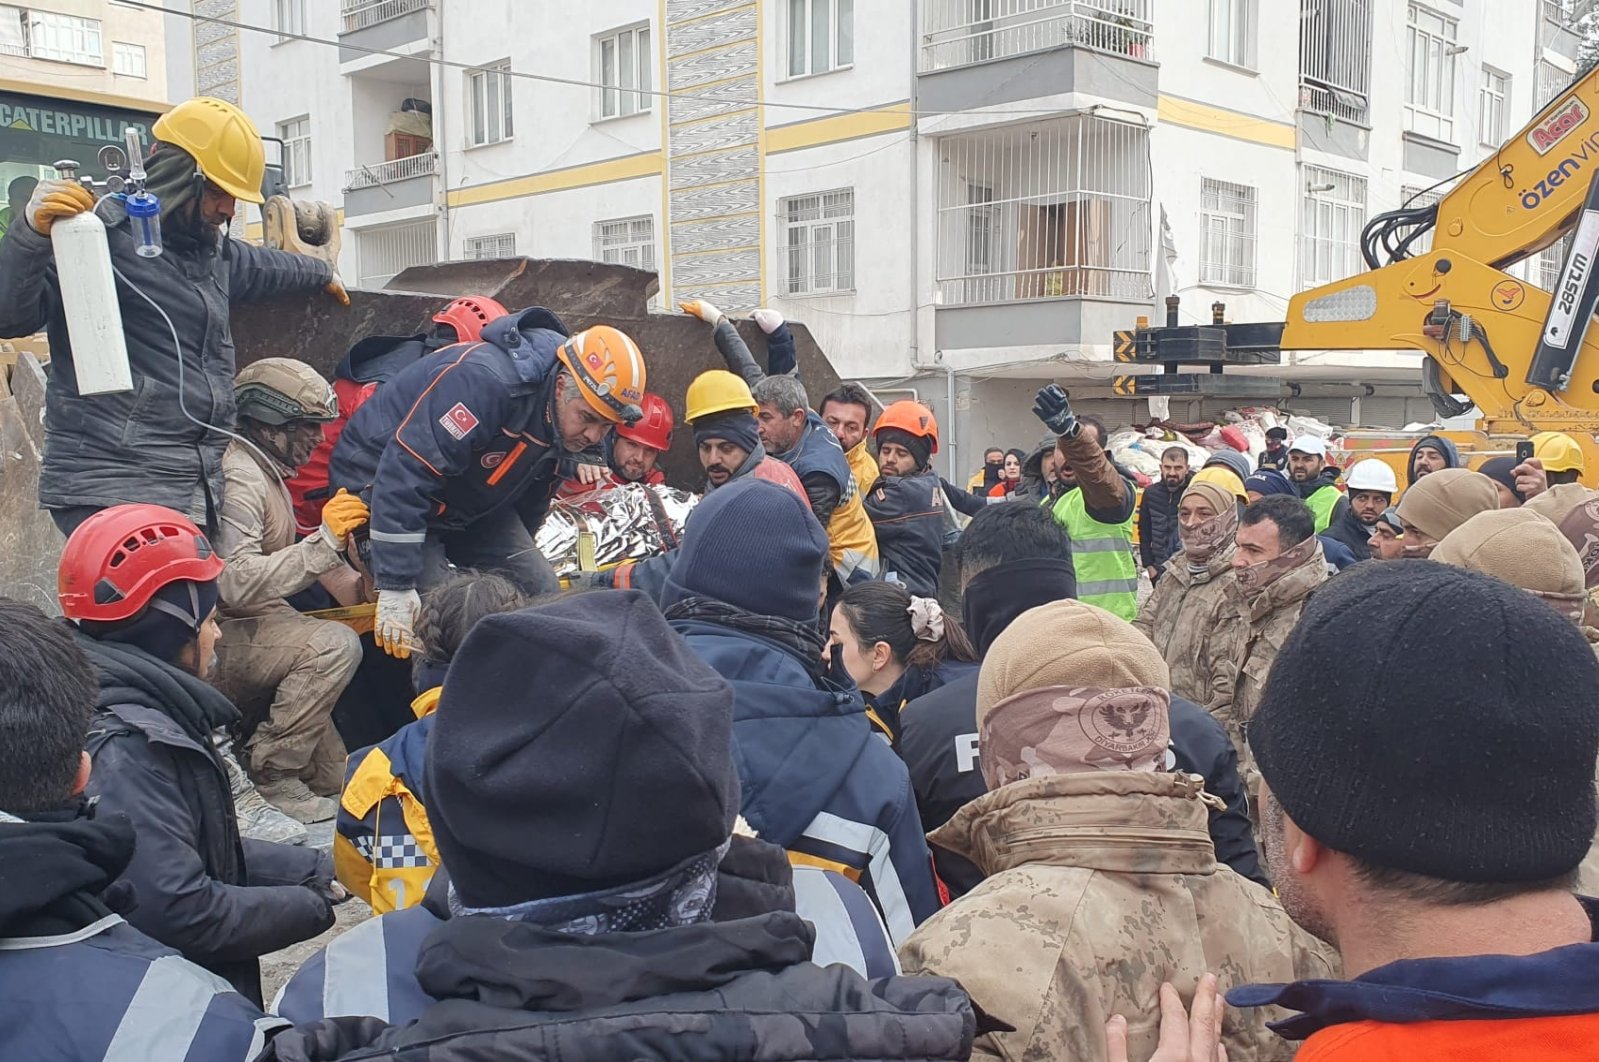 Emergency personnel and locals search for survivors at the site of a collapsed building in the aftermath of a major earthquake, Kahramanmaras, Türkiye, Feb. 8, 2023. (DHA Photo)